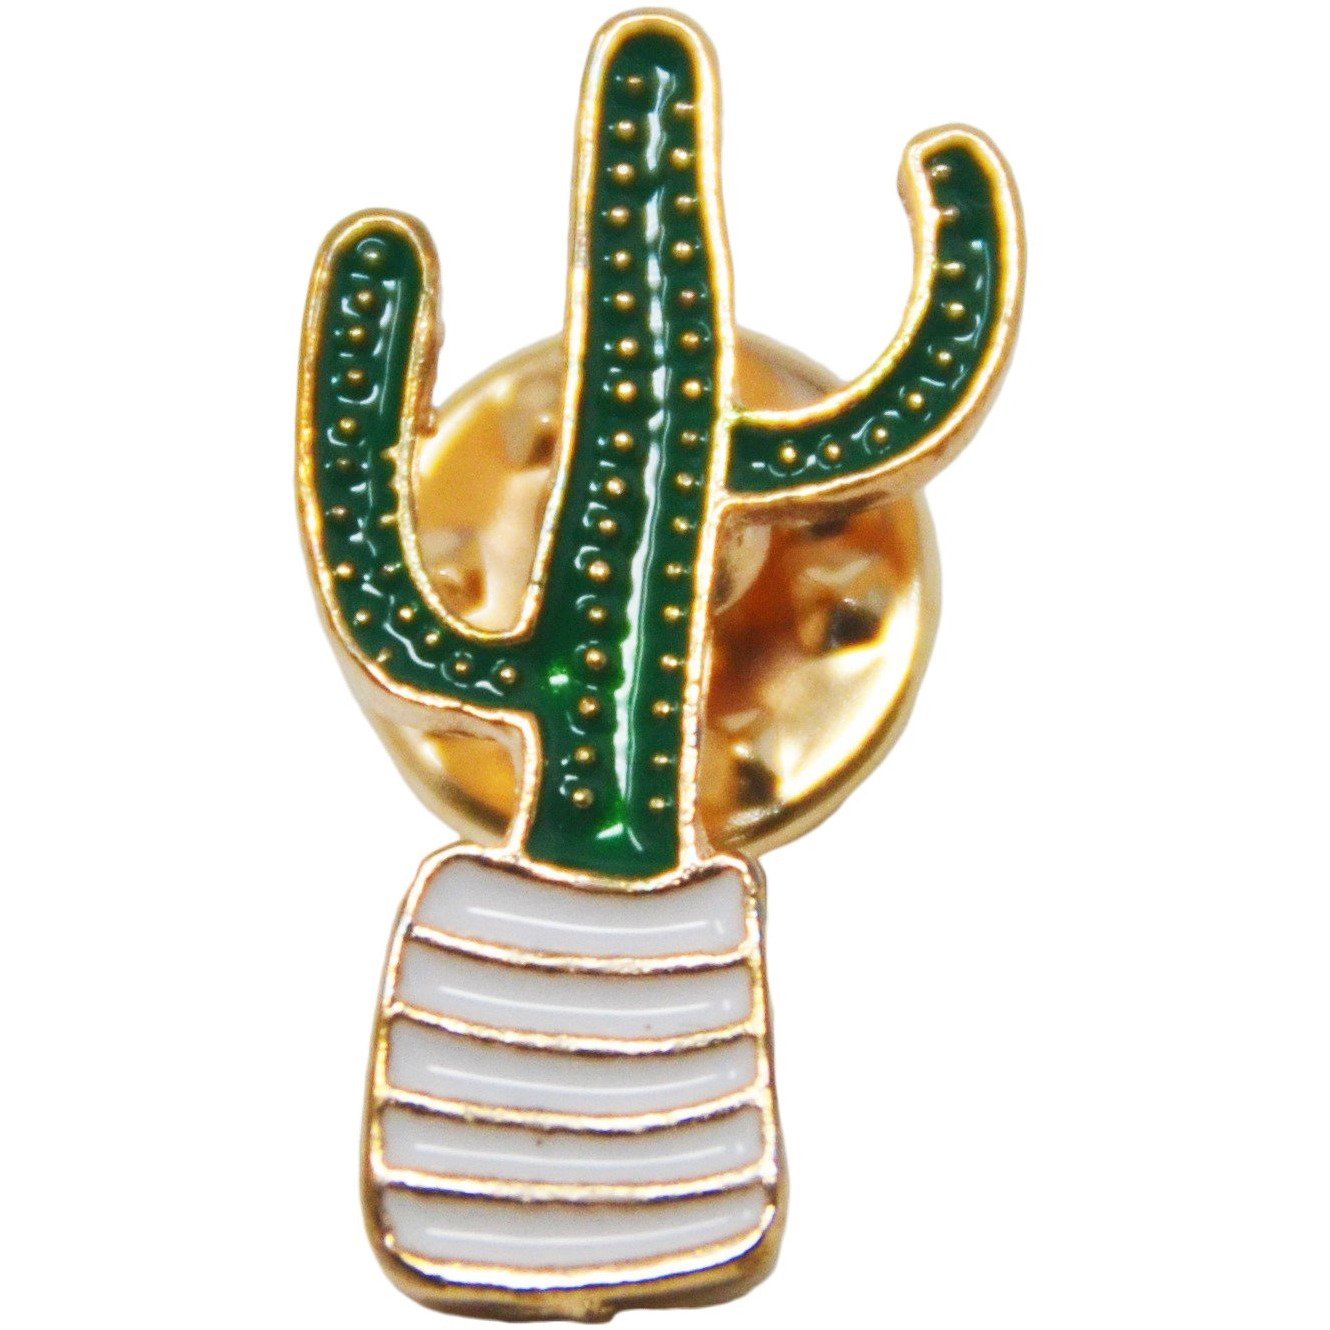 A cactus lapel pin with green and white stripes available at a top garden center near me.